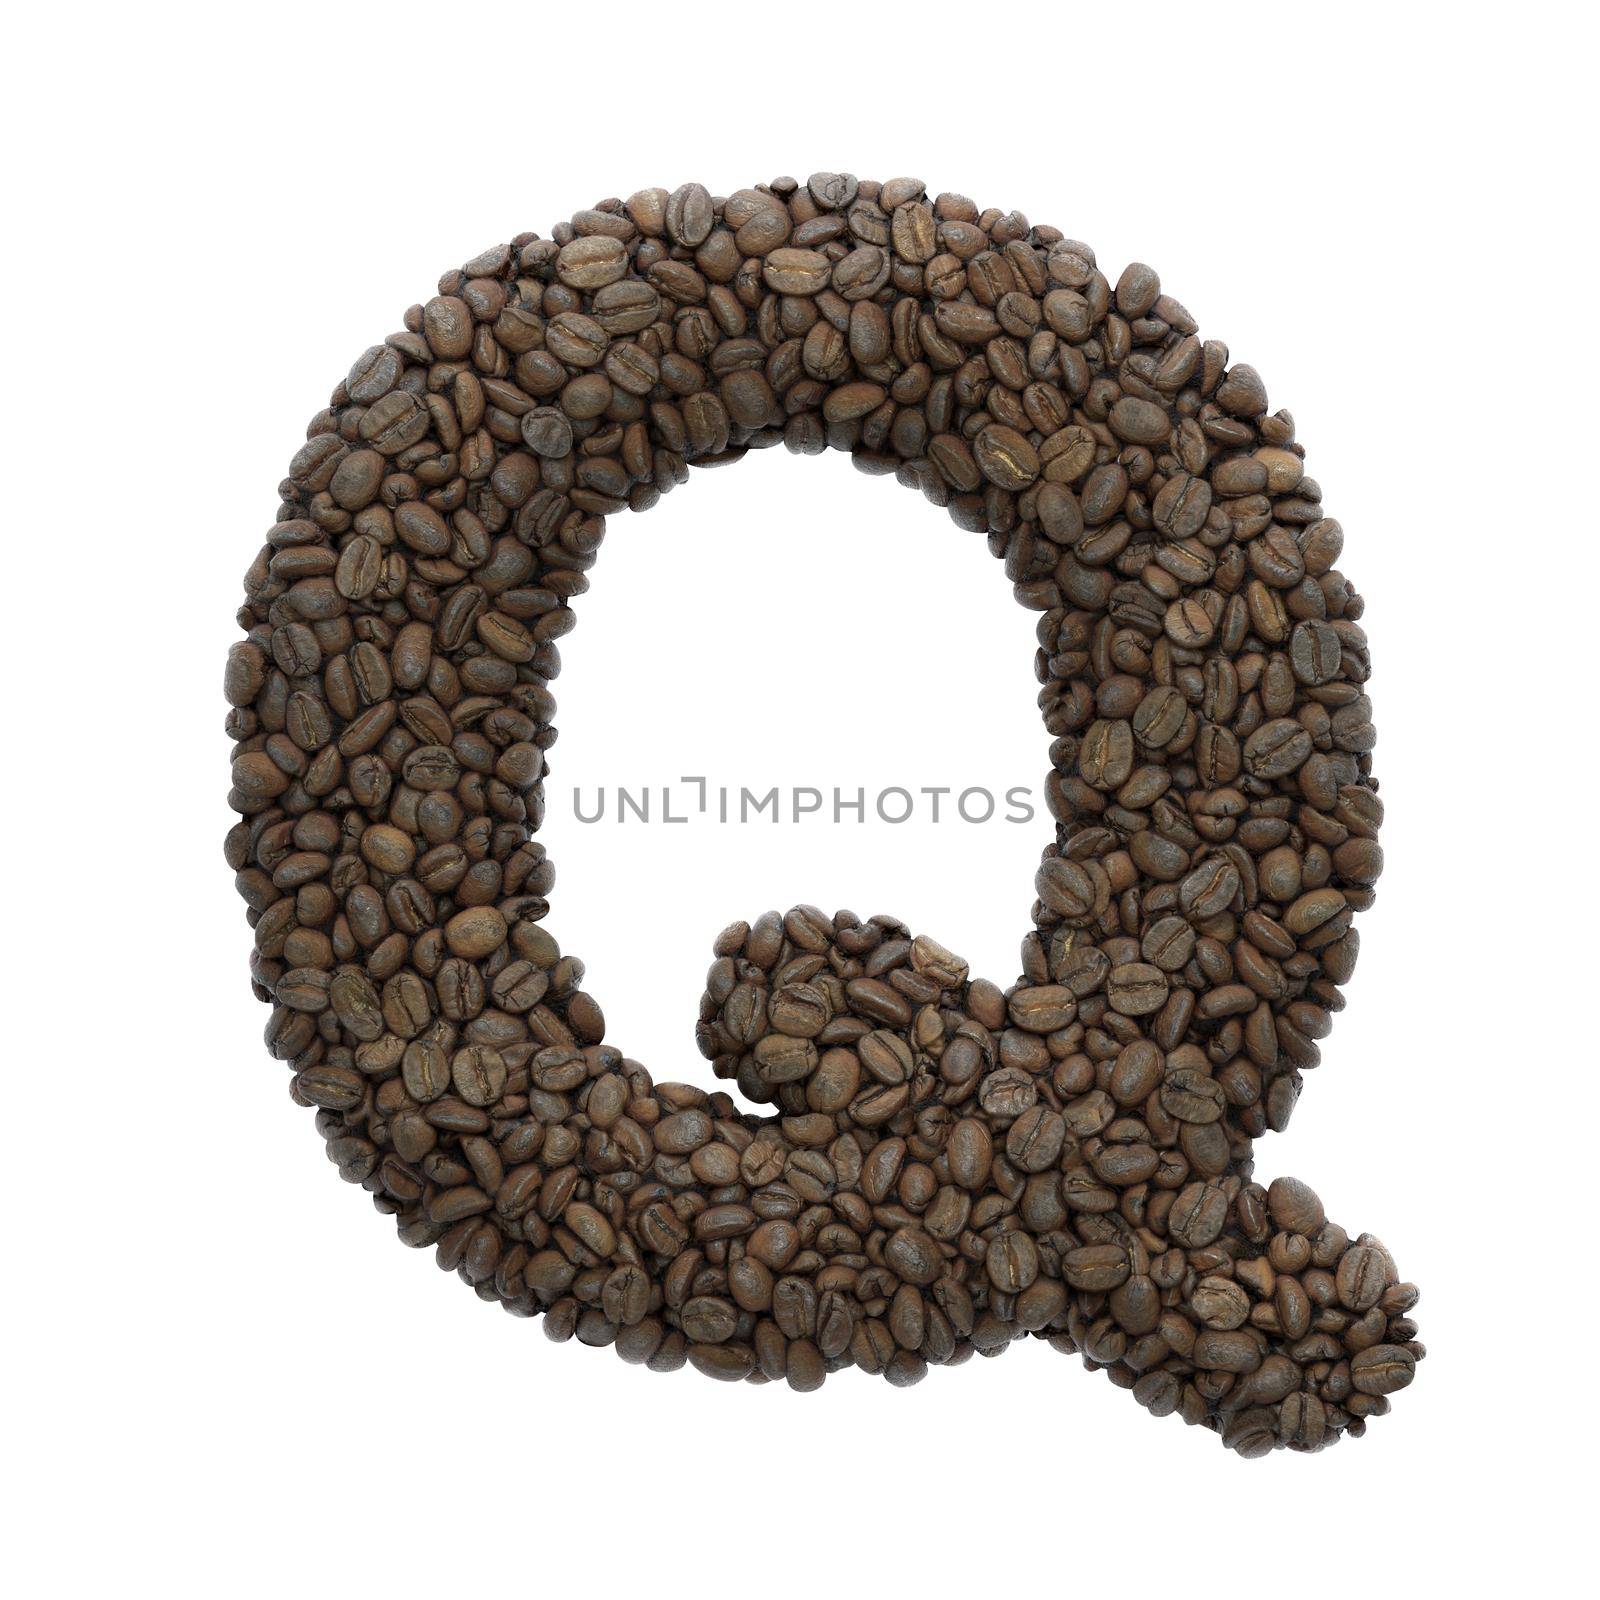 Coffee letter Q - large 3d roasted beans font isolated on white background. This alphabet is perfect for creative illustrations related but not limited to Coffee, energy, insomnia...